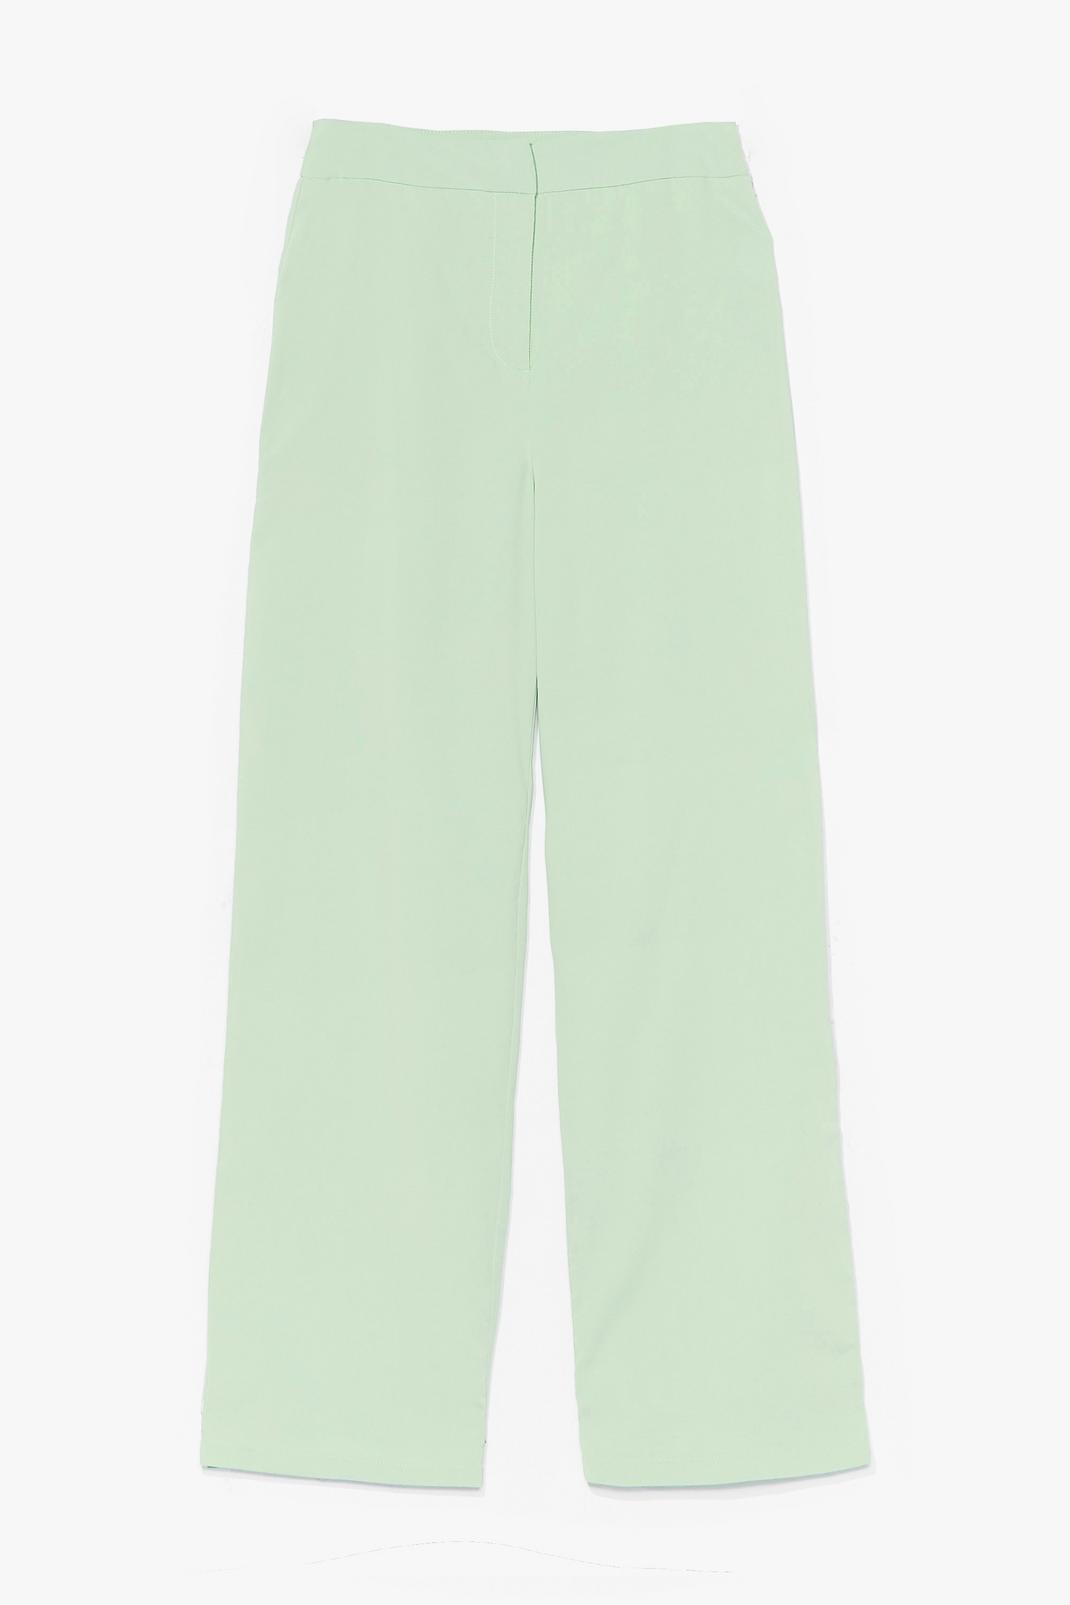 Mint Let's Not Waist Time High-Waisted Pants image number 1